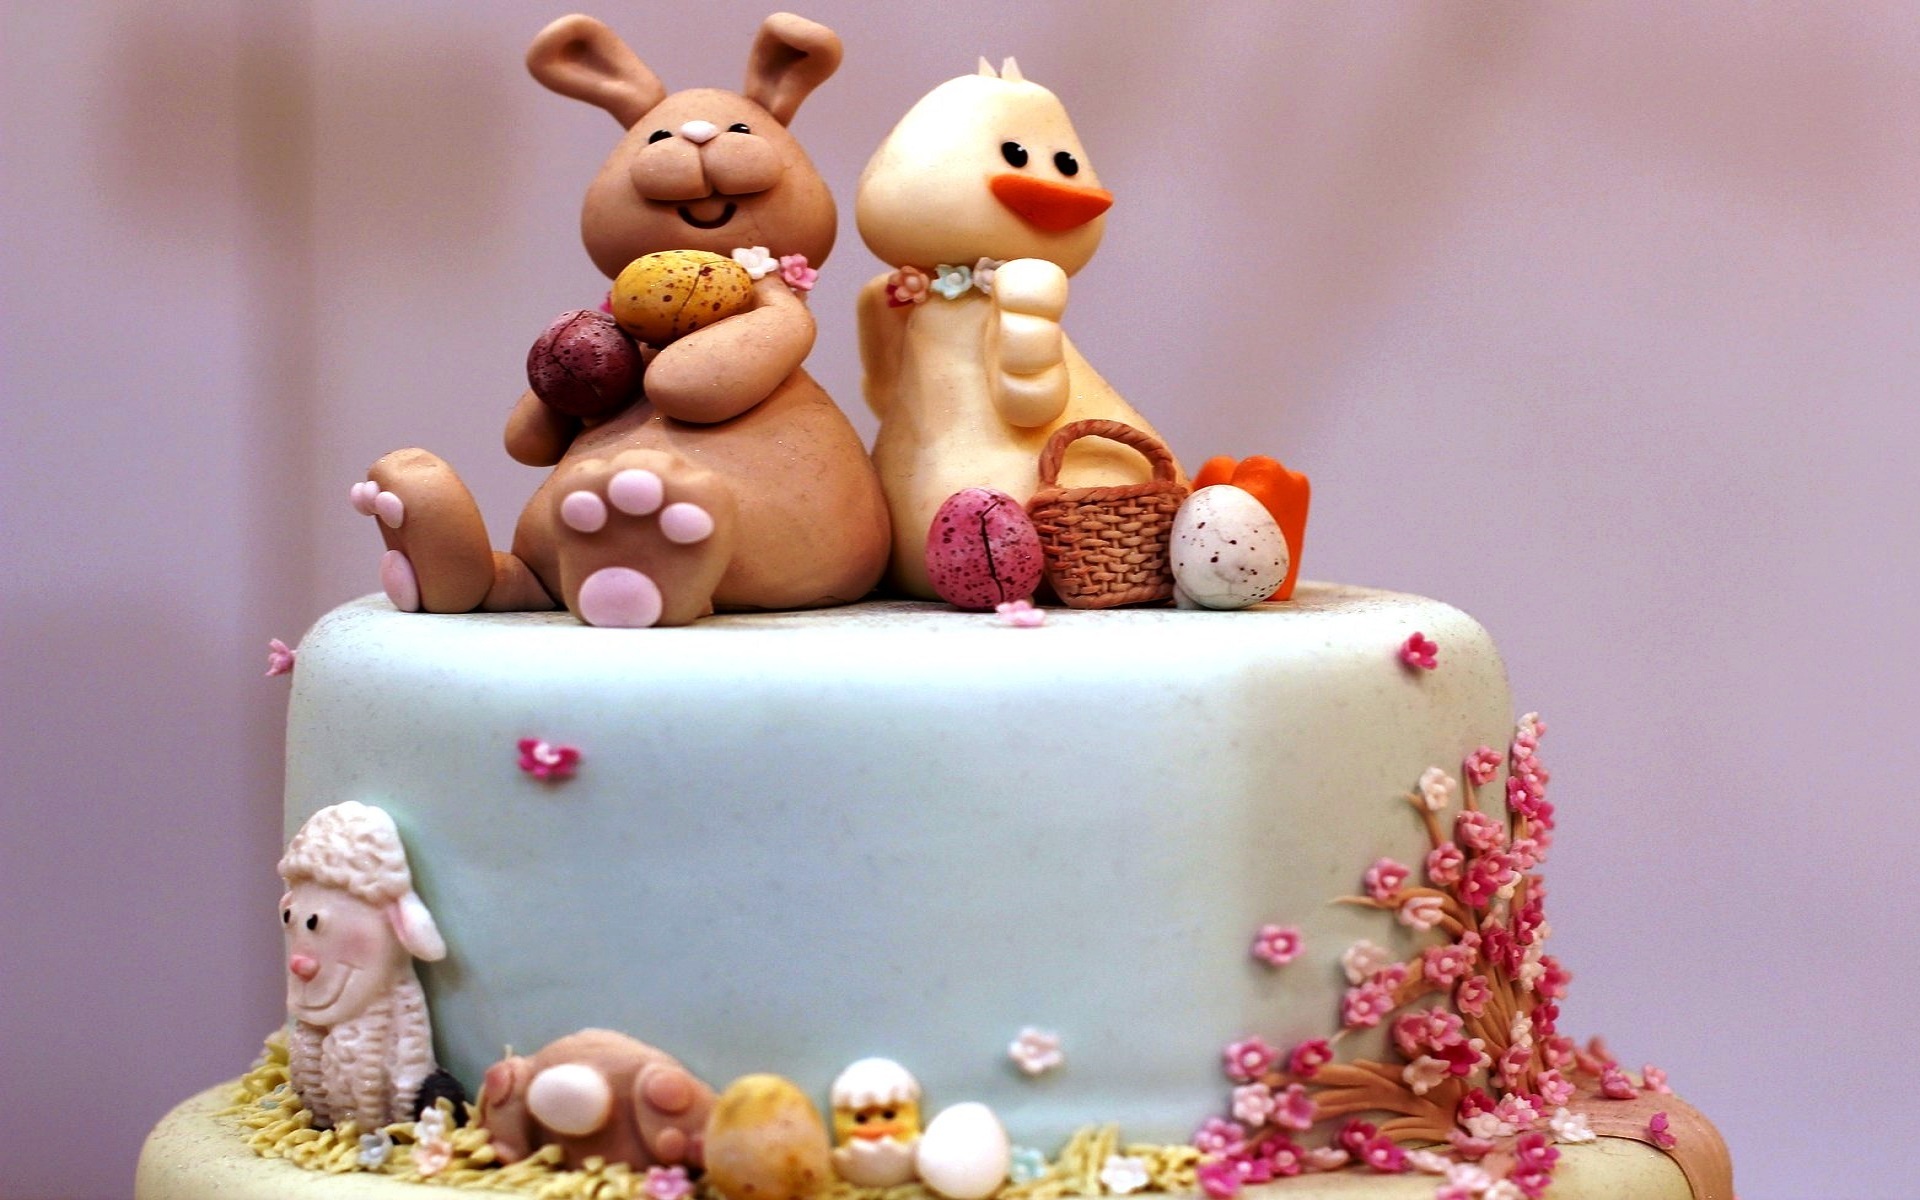 Beena Fernandes - Custom design eggless cakes with marzipan figurines